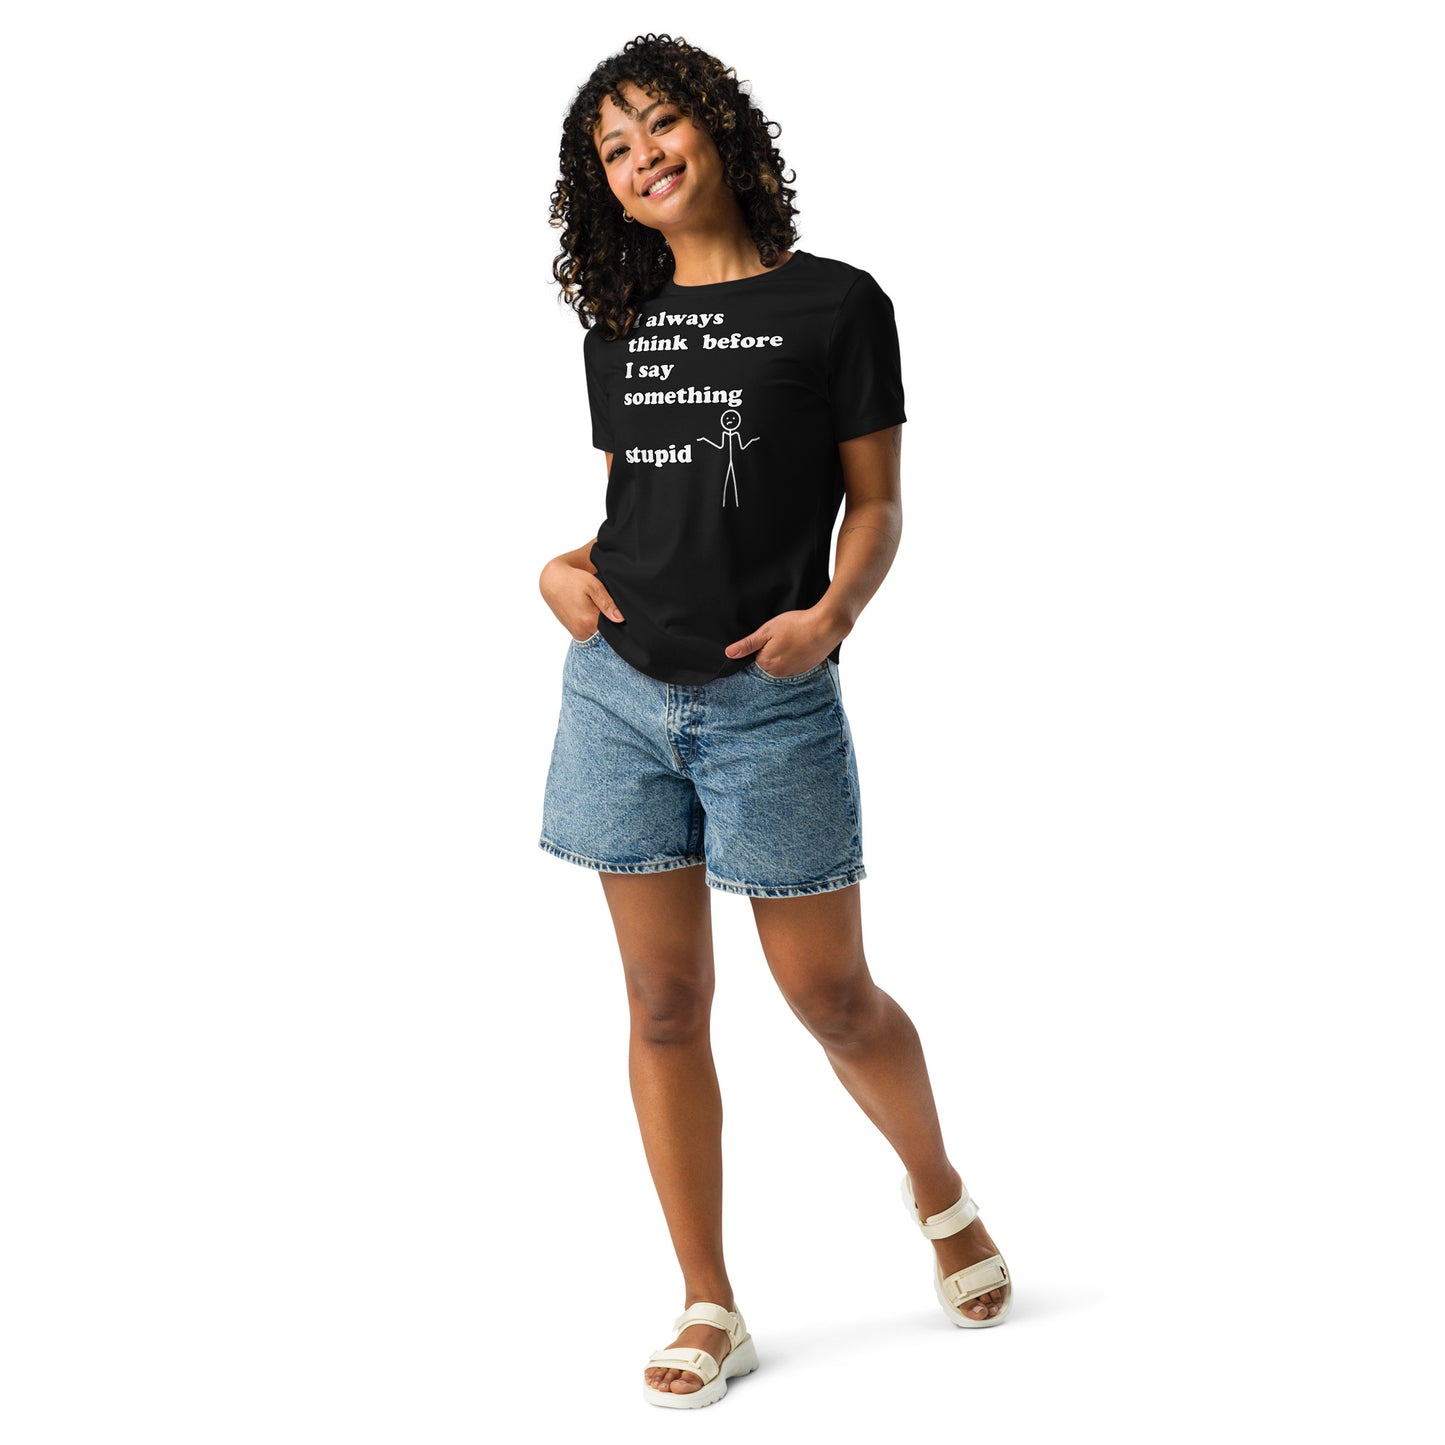 Woman with black t-shirt with text "I always think before I say something stupid"